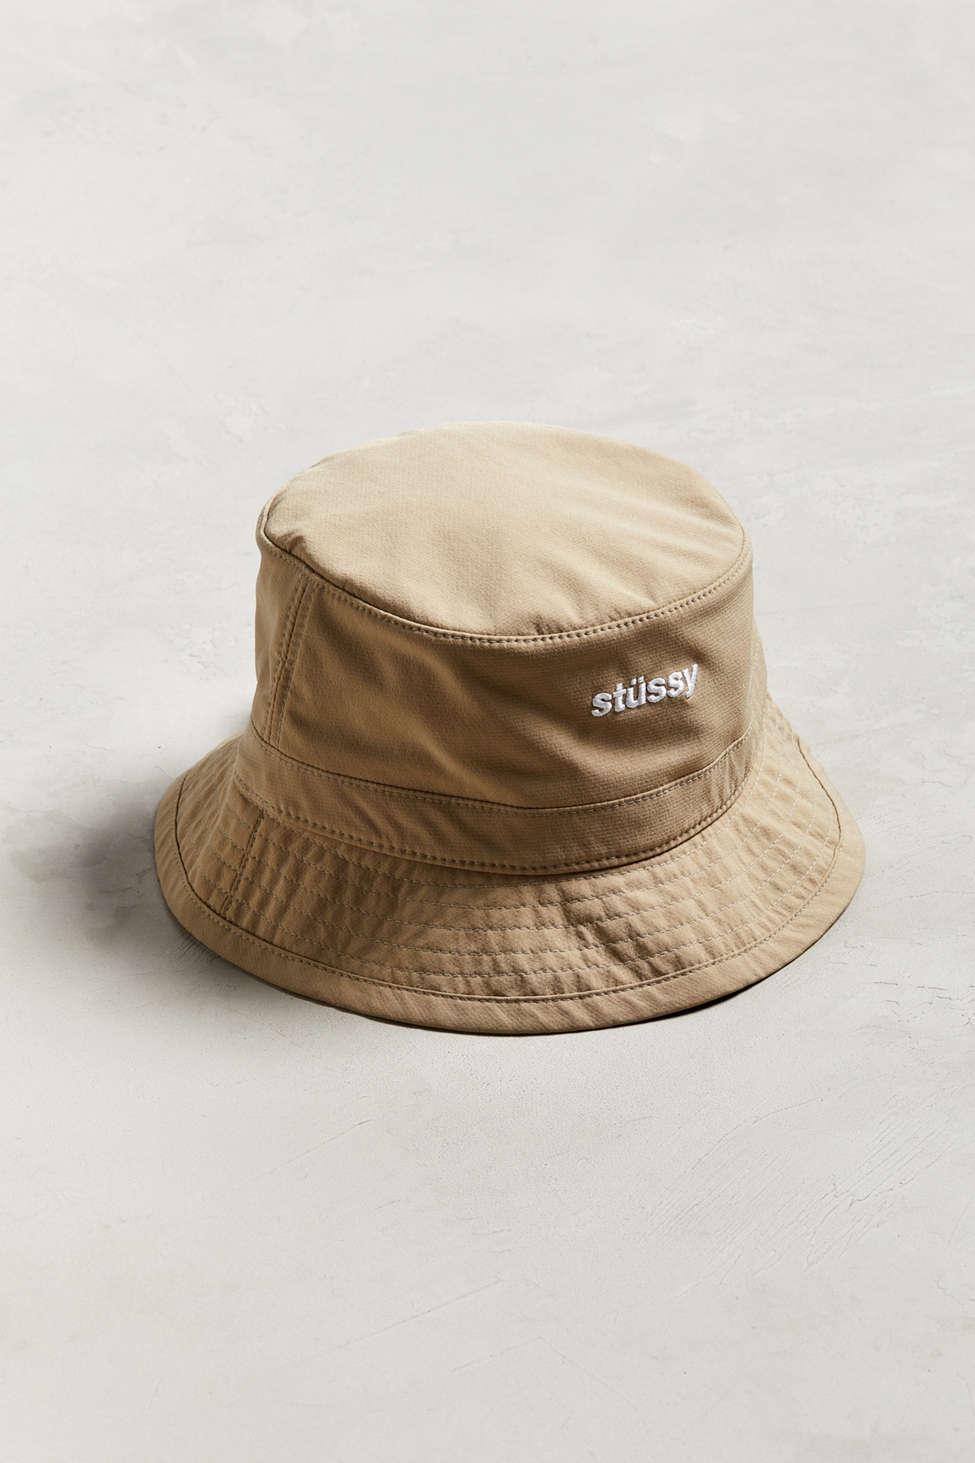 Stussy Synthetic Bungee Bucket Hat in Beige (Natural) for Men - Lyst